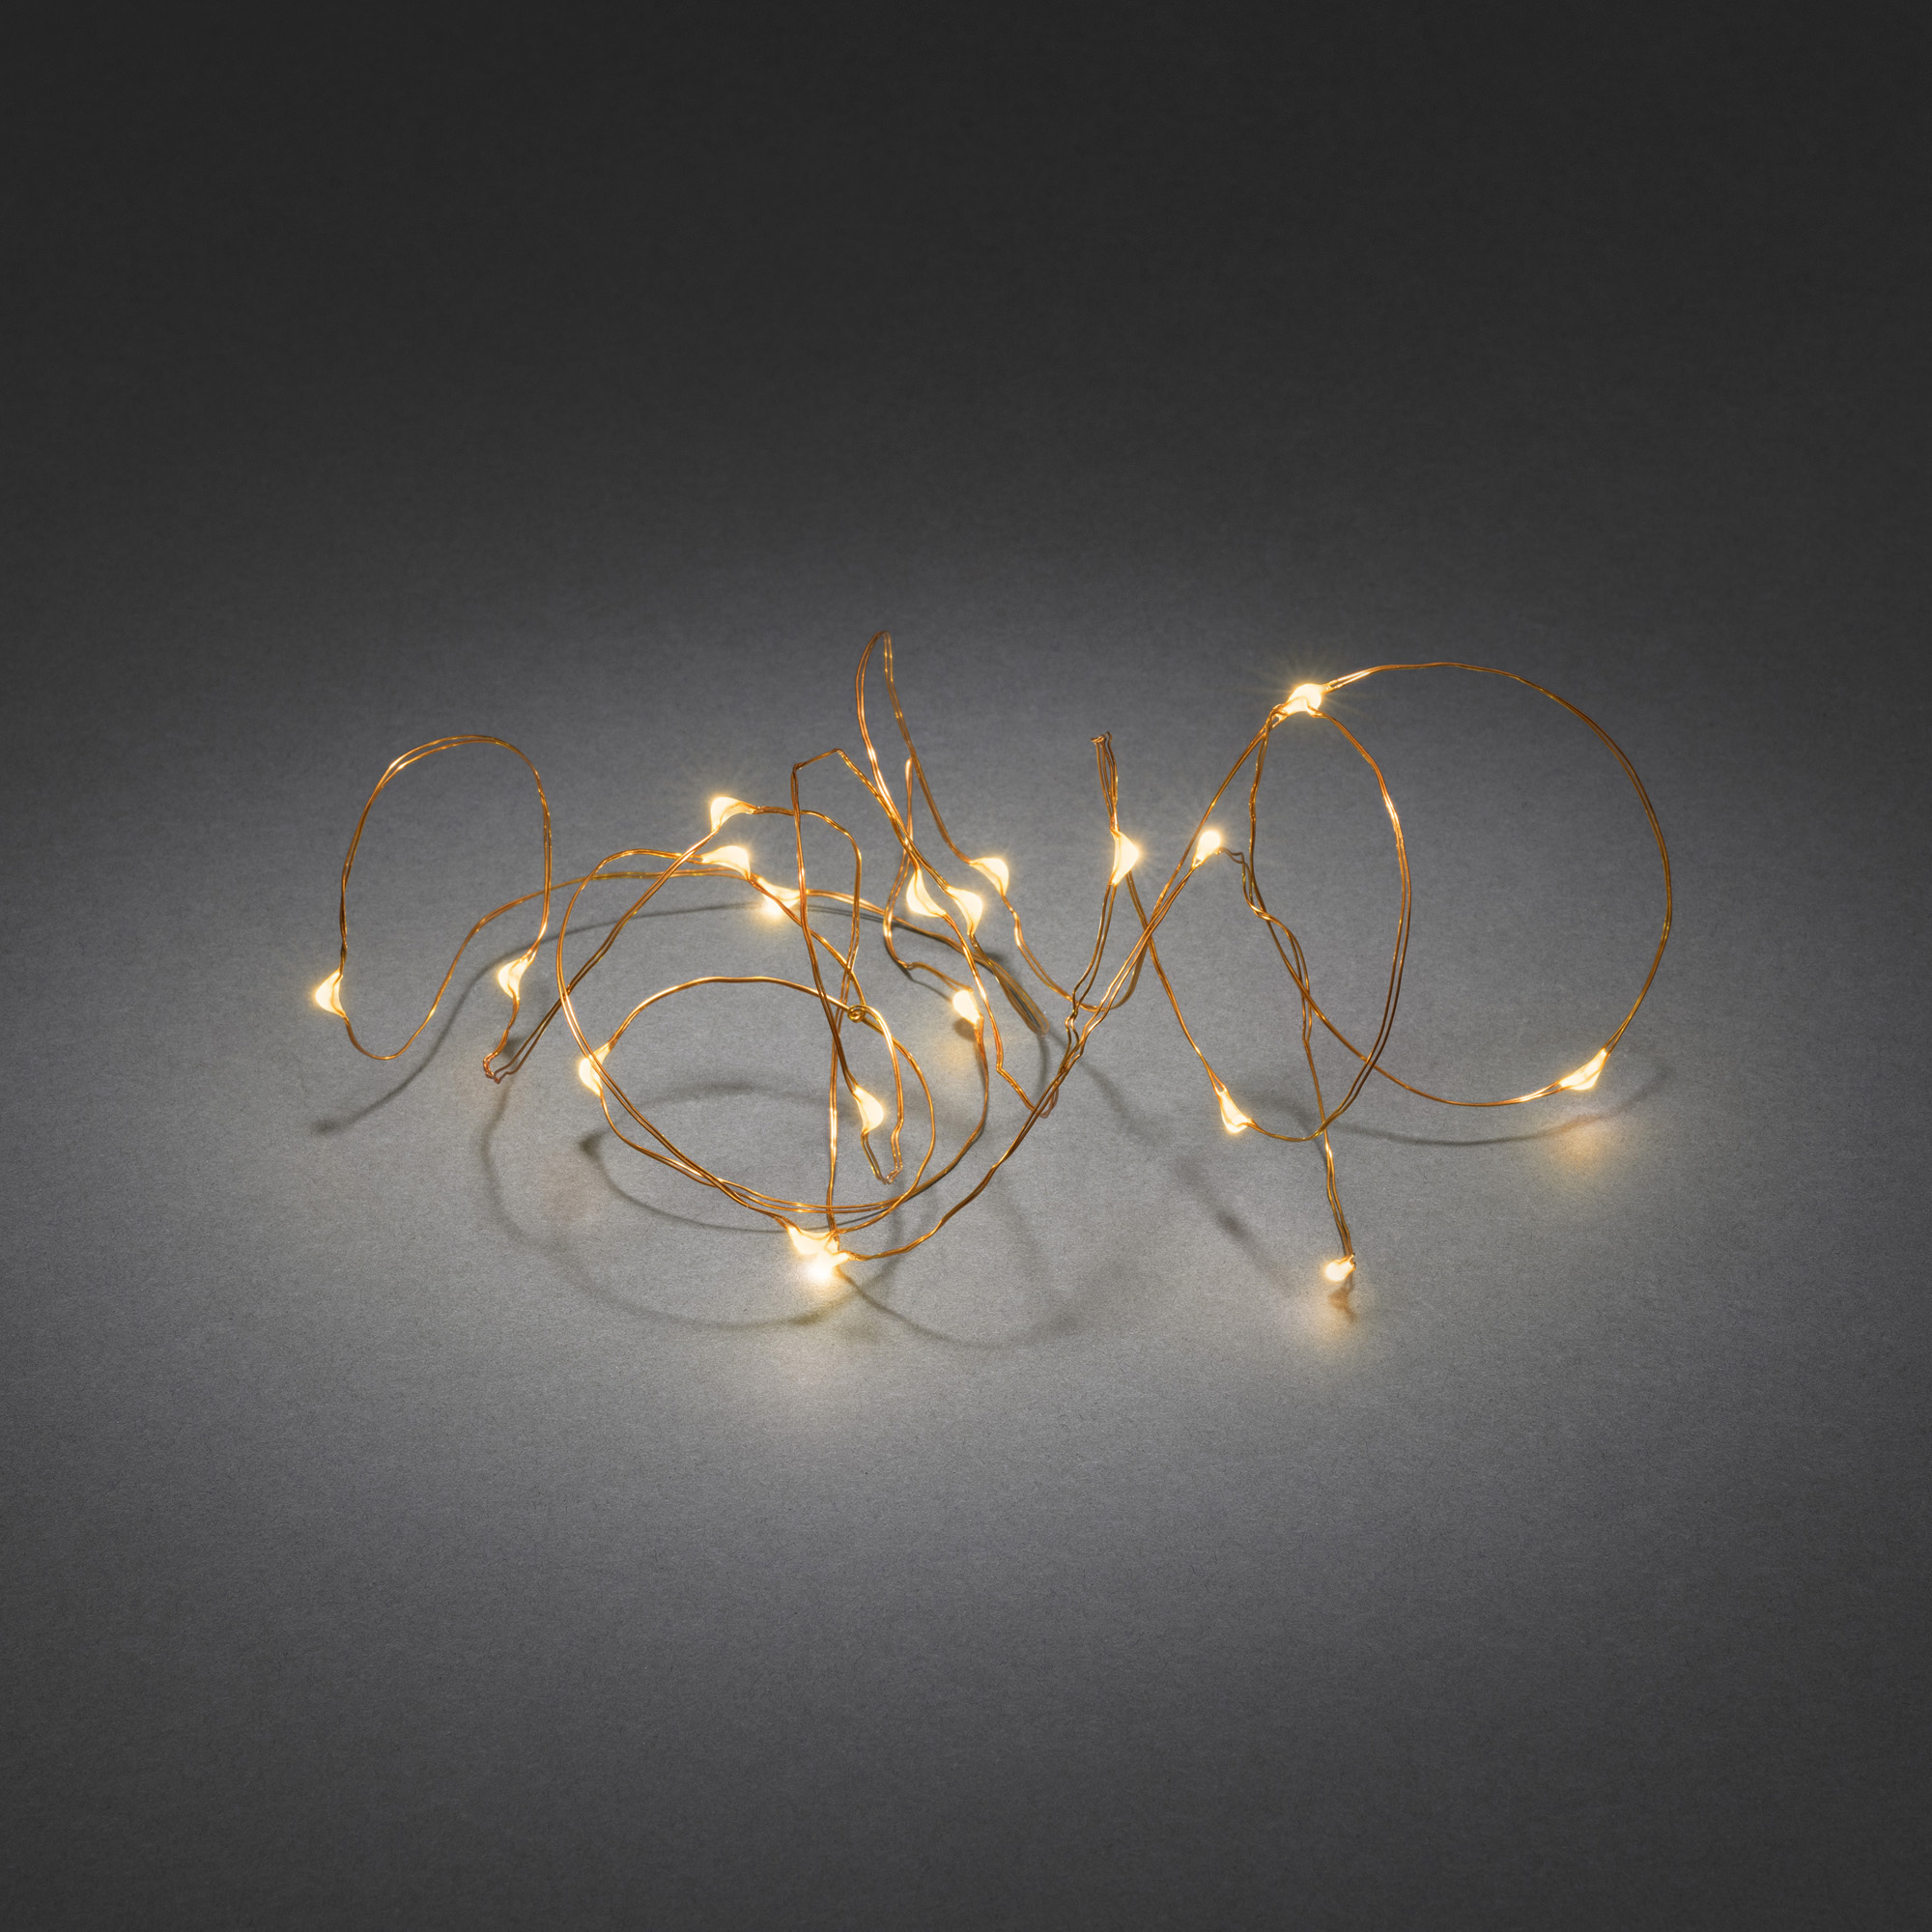 LED Micro Light Chain amber, 2.4m (20 LEDs), 6h timer, Battery Operated, copper